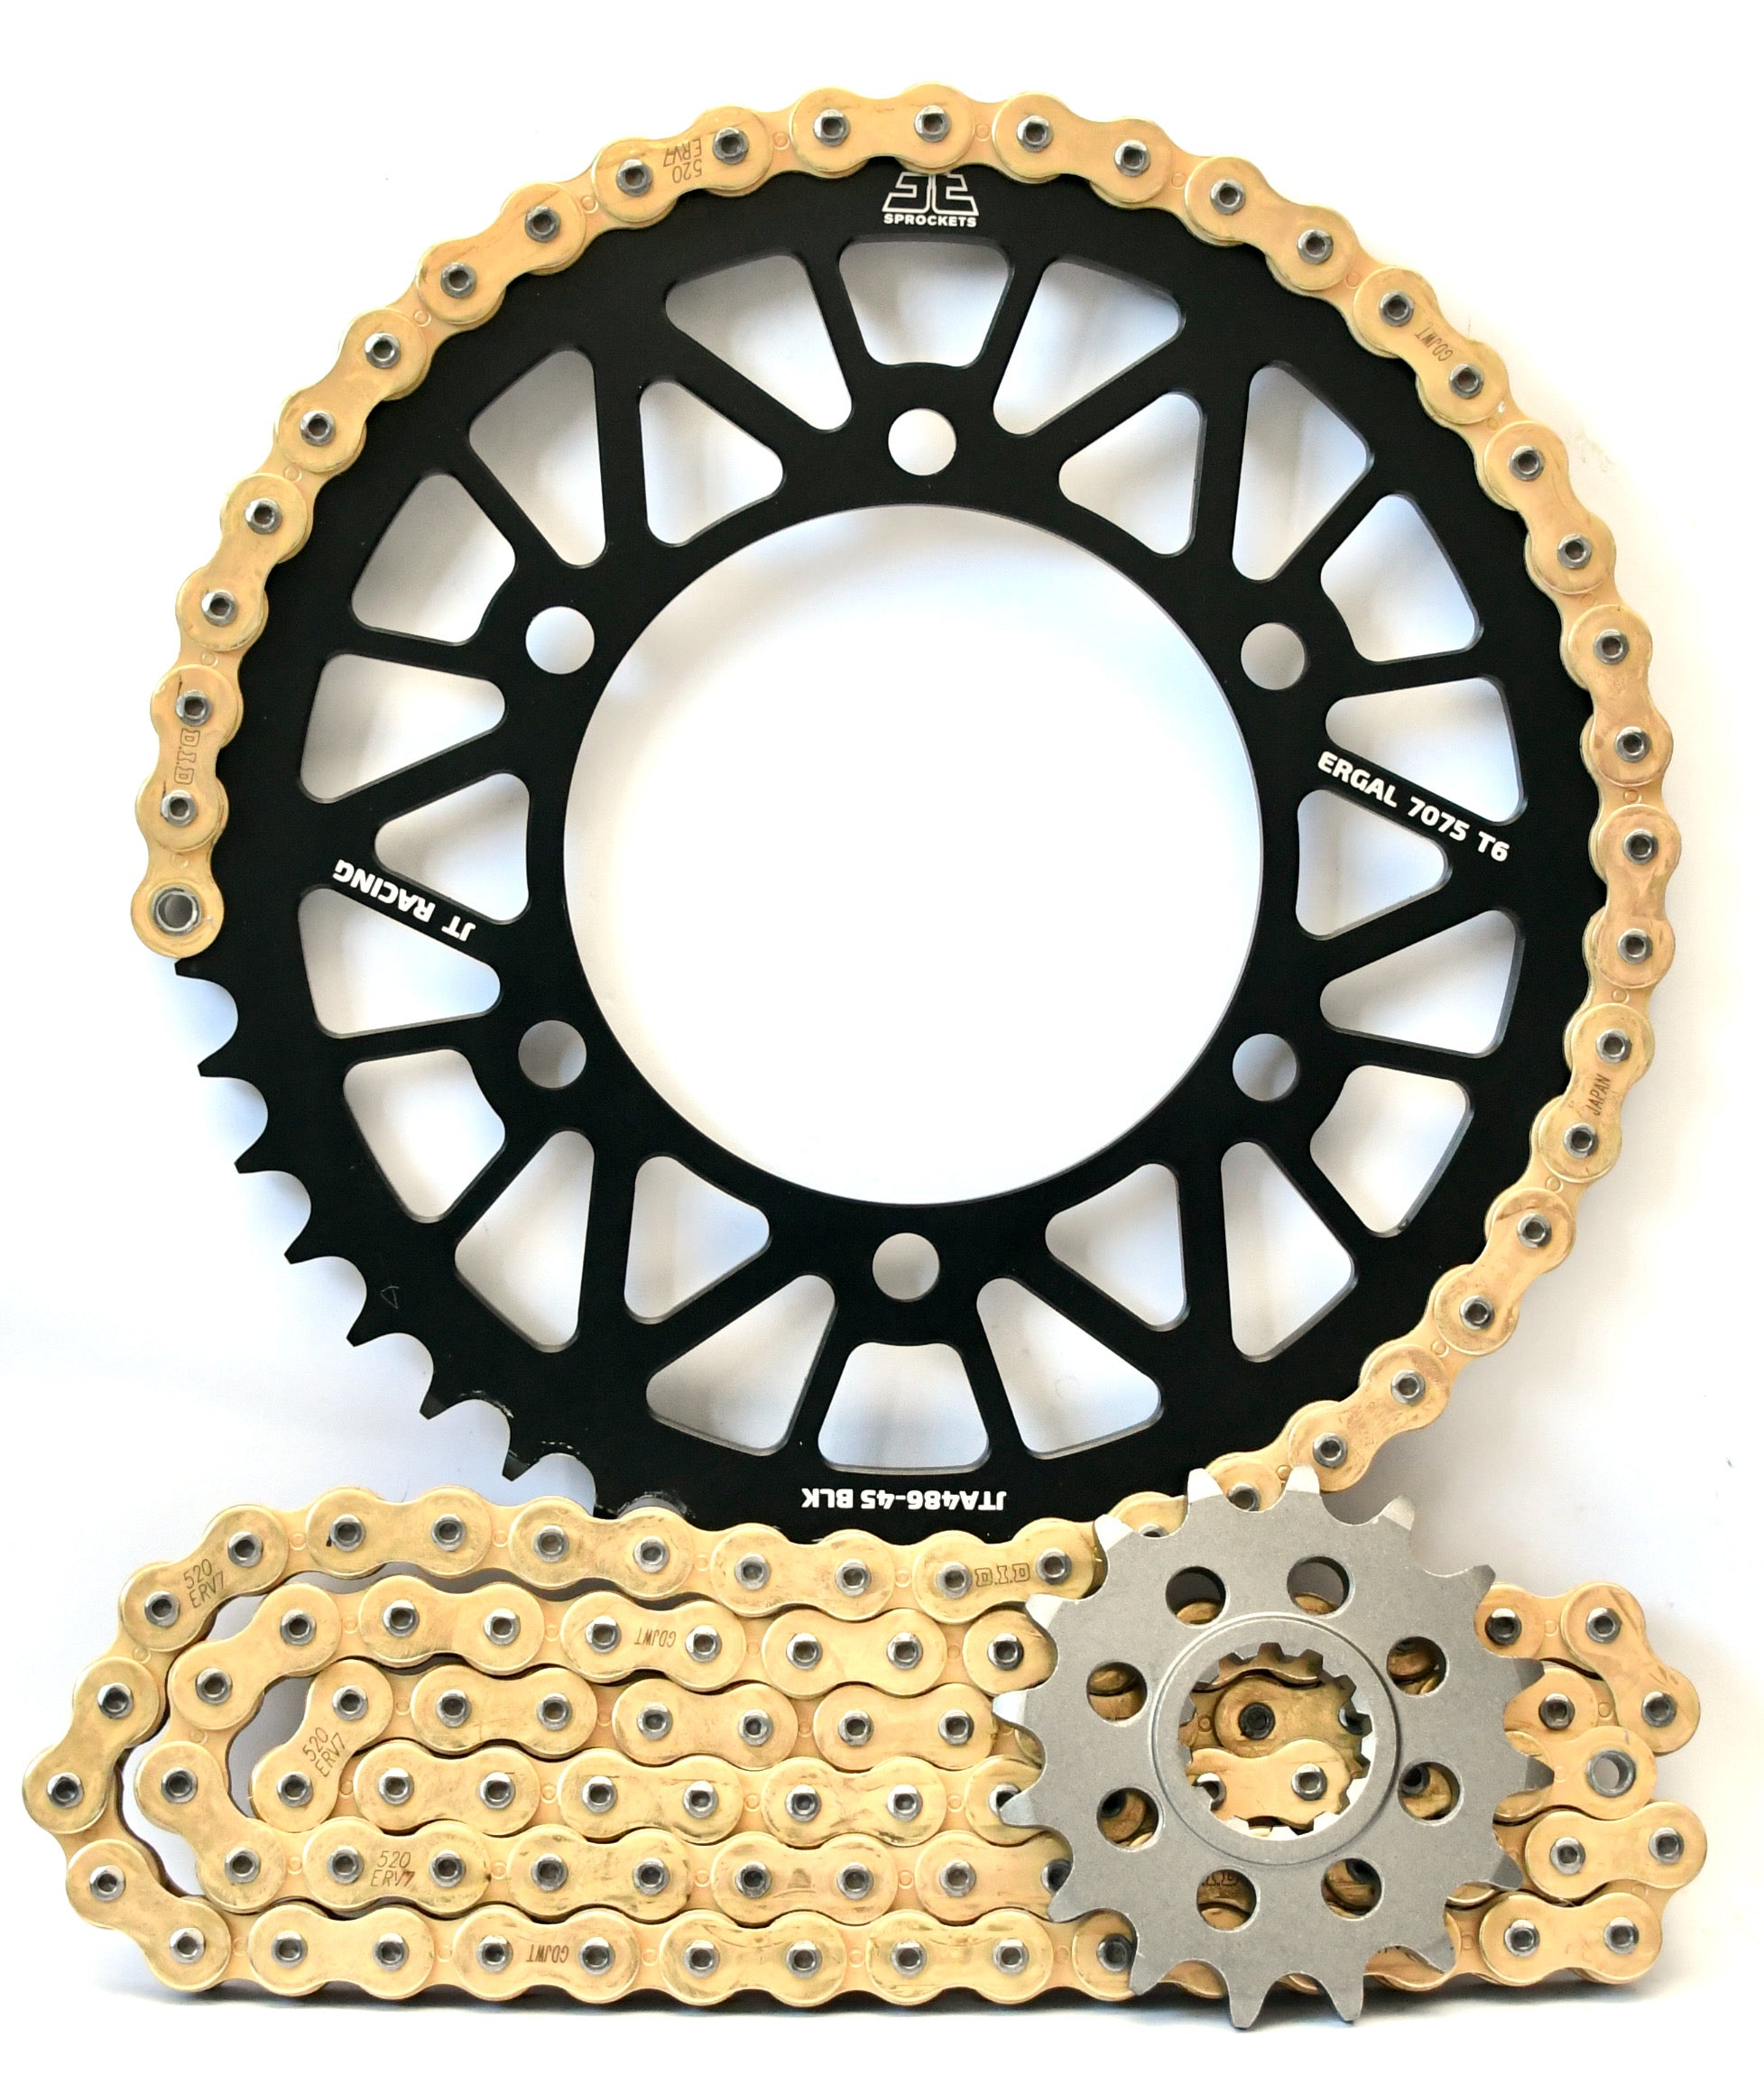 JT Racelite and DID 520 Conversion Chain & Sprocket Kit for Yamaha R1 2009-2014 - Standard Gearing